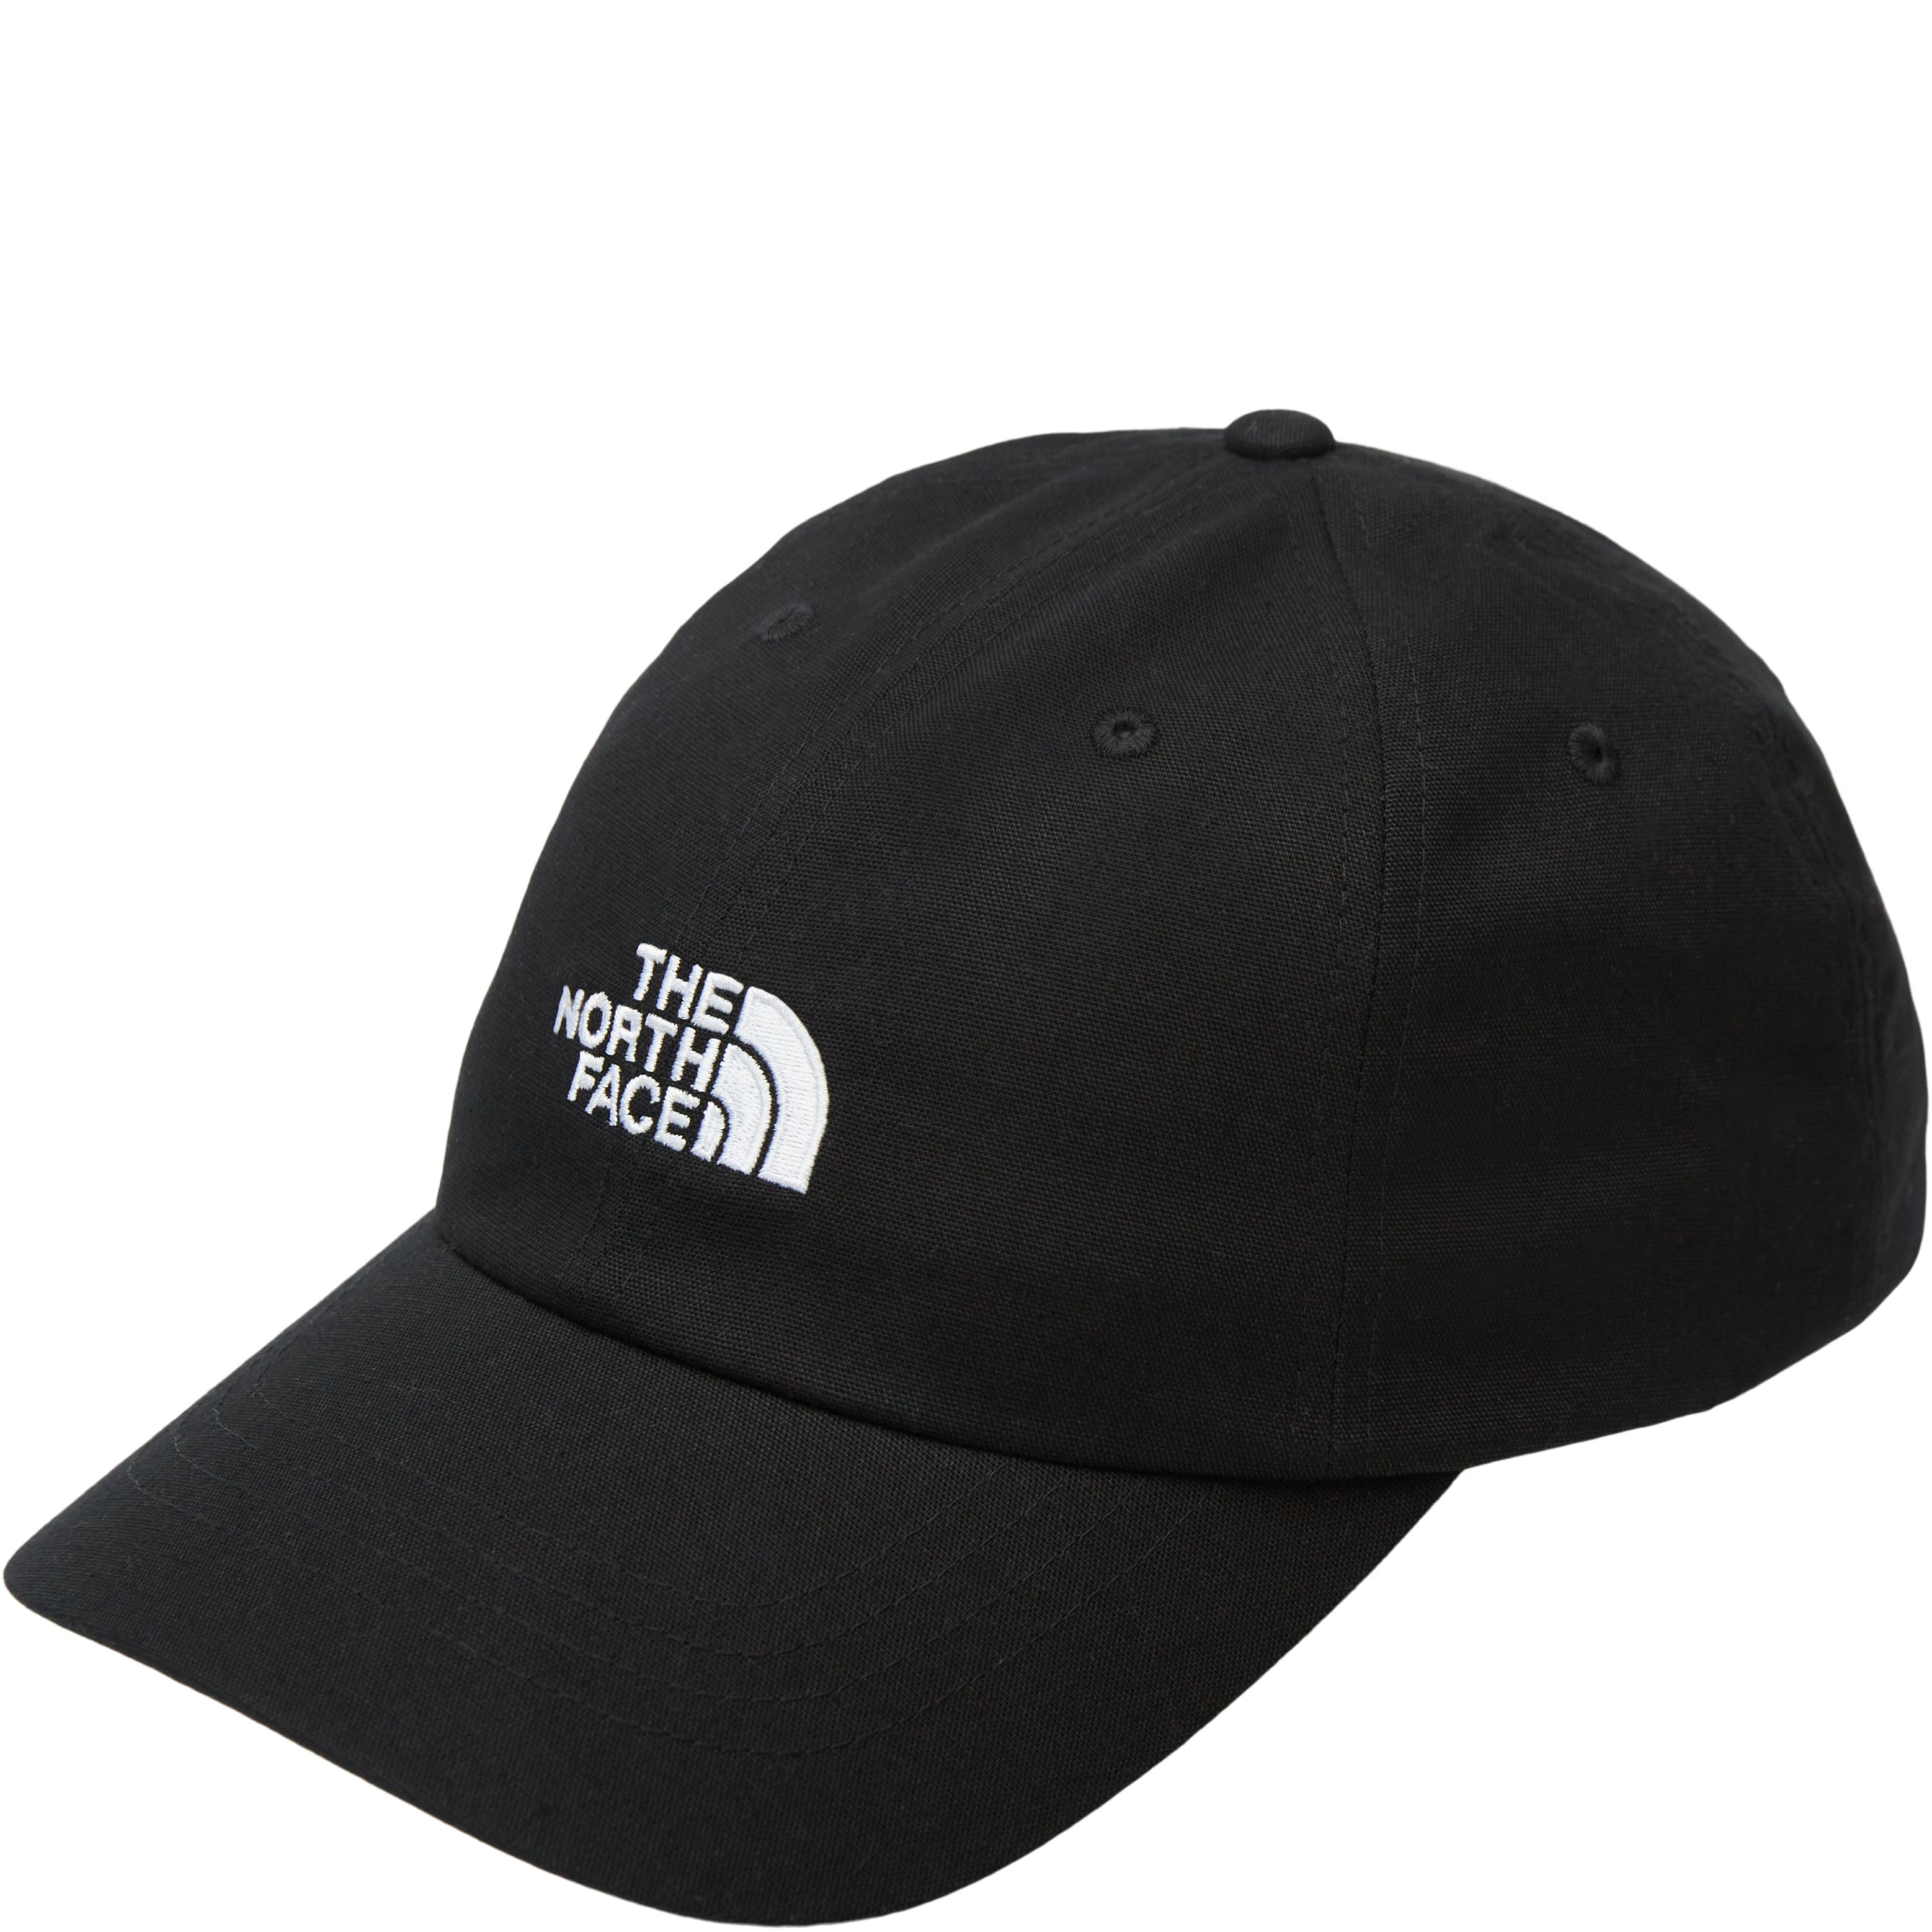 The North Face Caps NORM HAT NF0A3SH3 2303 Black